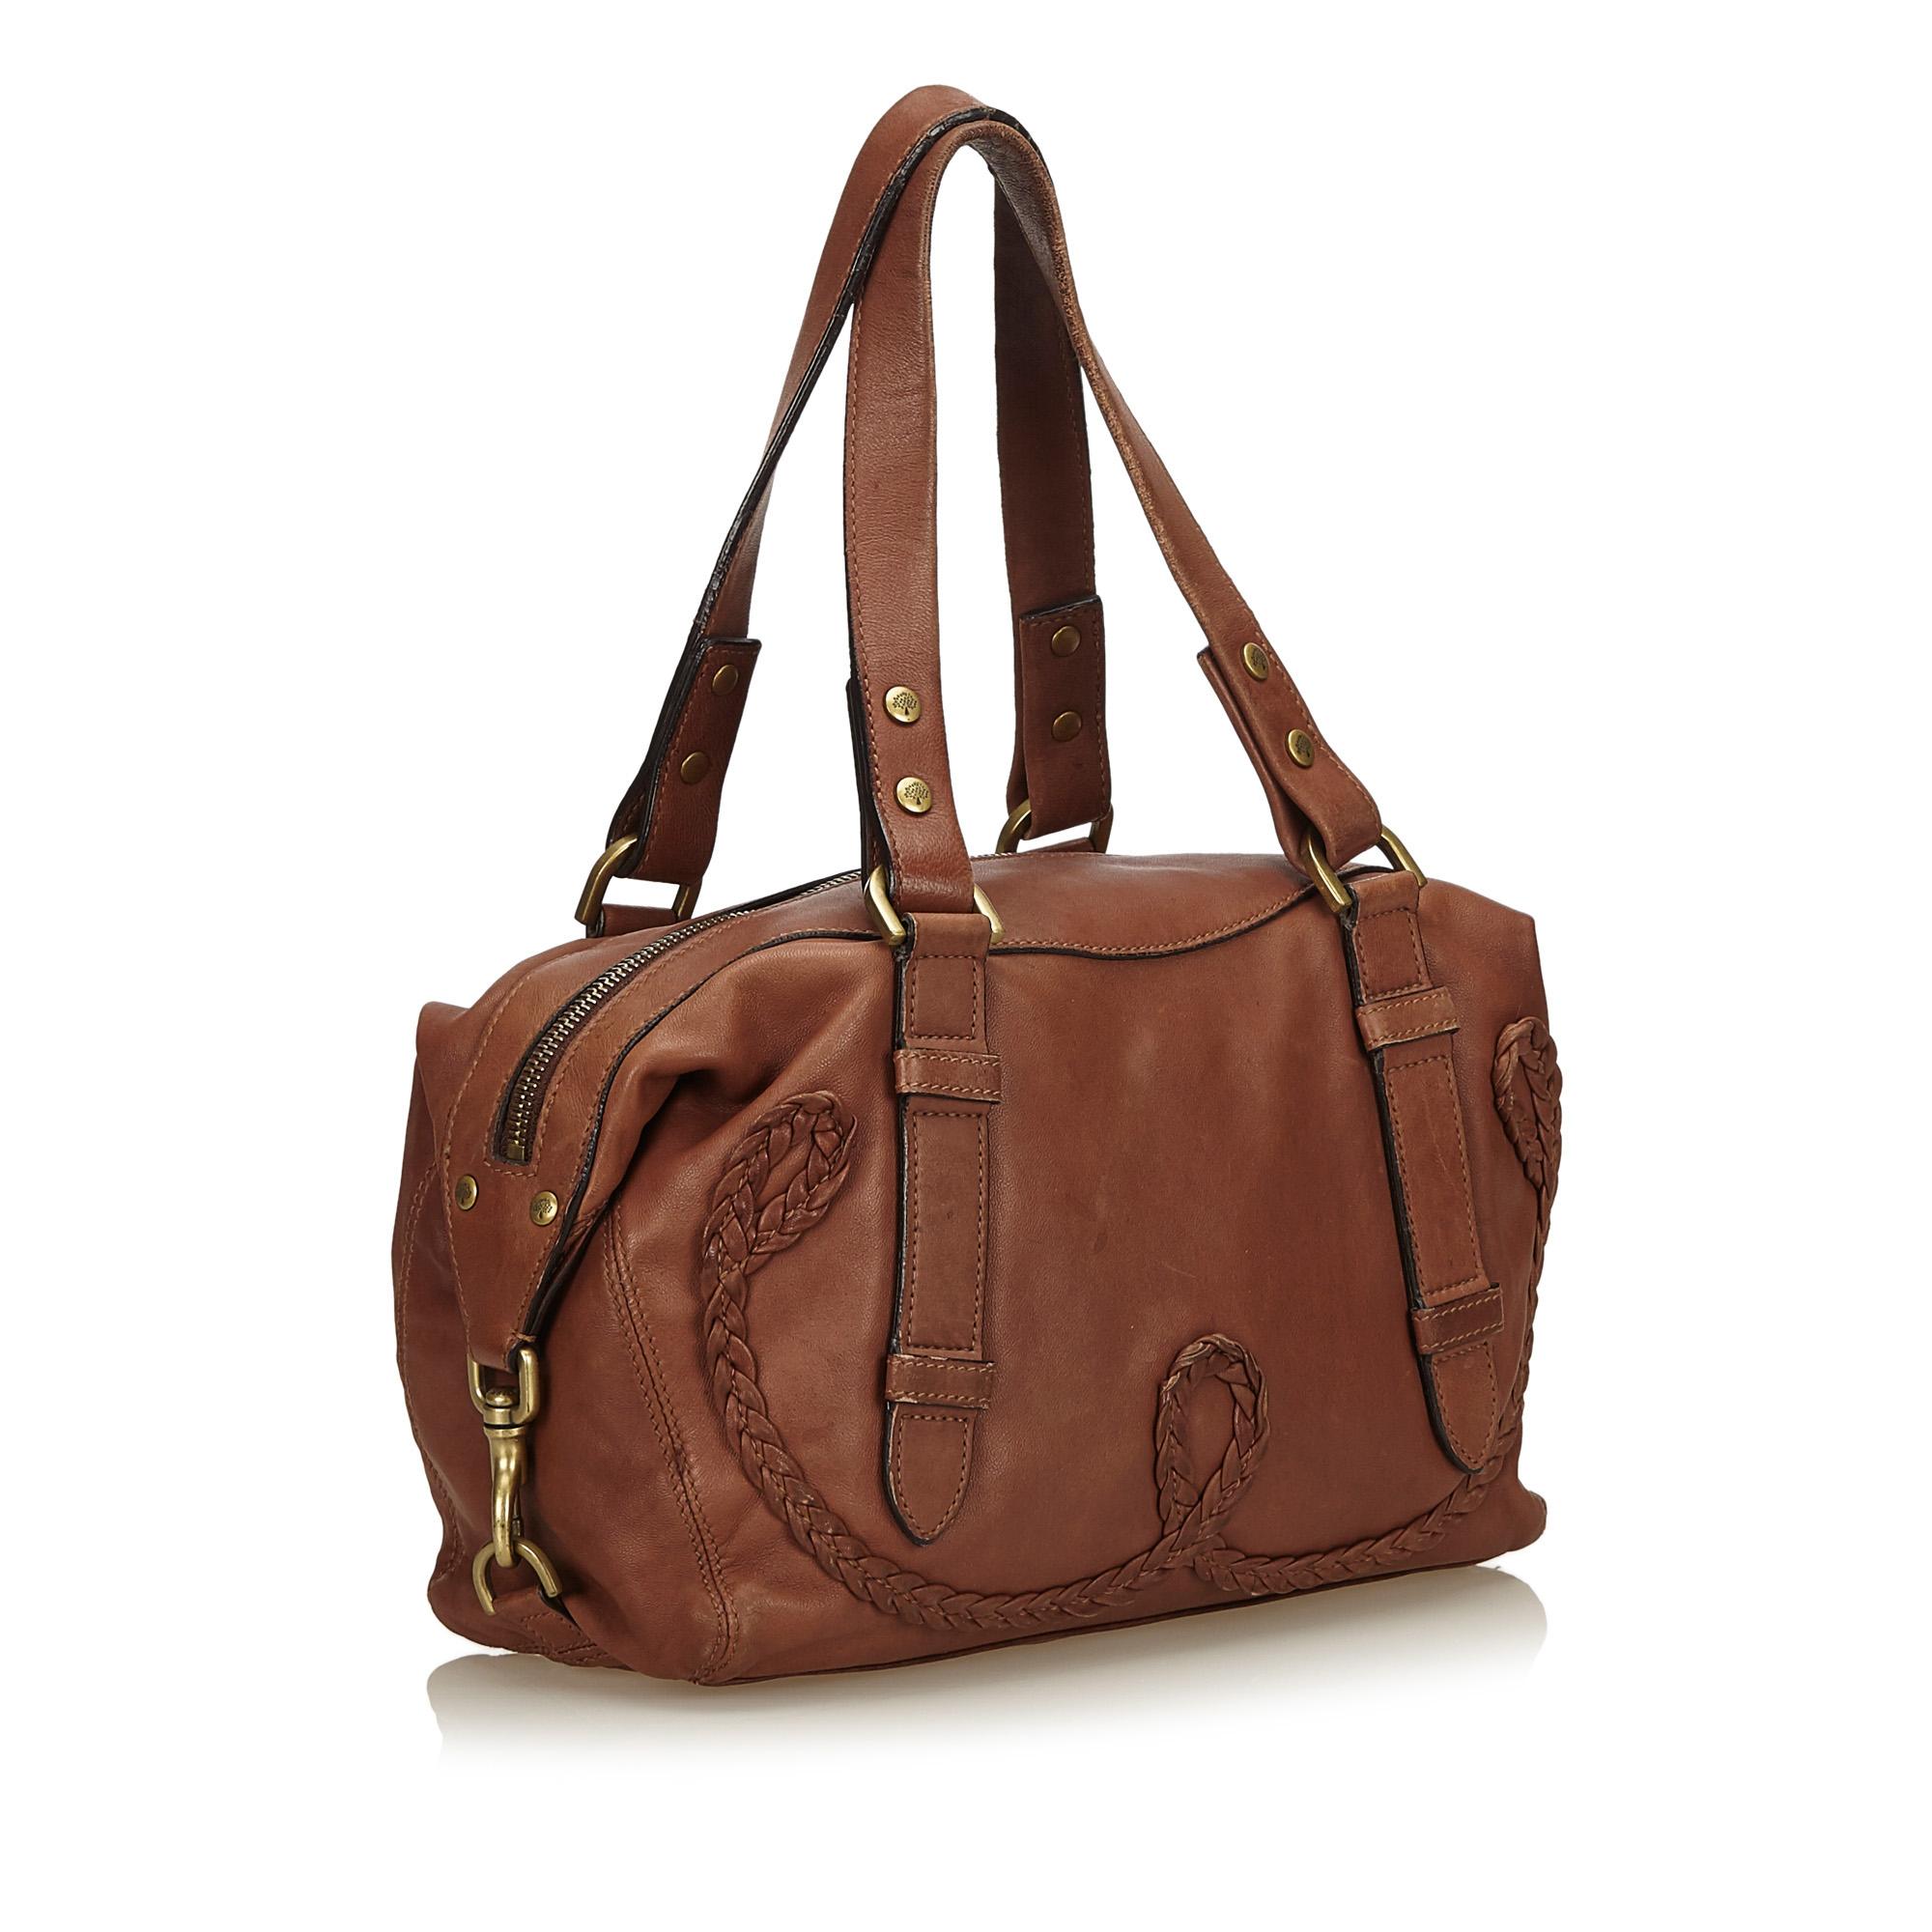 This shoulder bag features a leather body, flat straps, and a top zip closure.

It carries a B+ condition rating.

Dimensions: 
Length 19.00 cm
Width 28.00 cm
Depth 10.00 cm
Shoulder Drop 21.00 cm

Inclusions: Dust Bag, 

Color: Brown

Material: